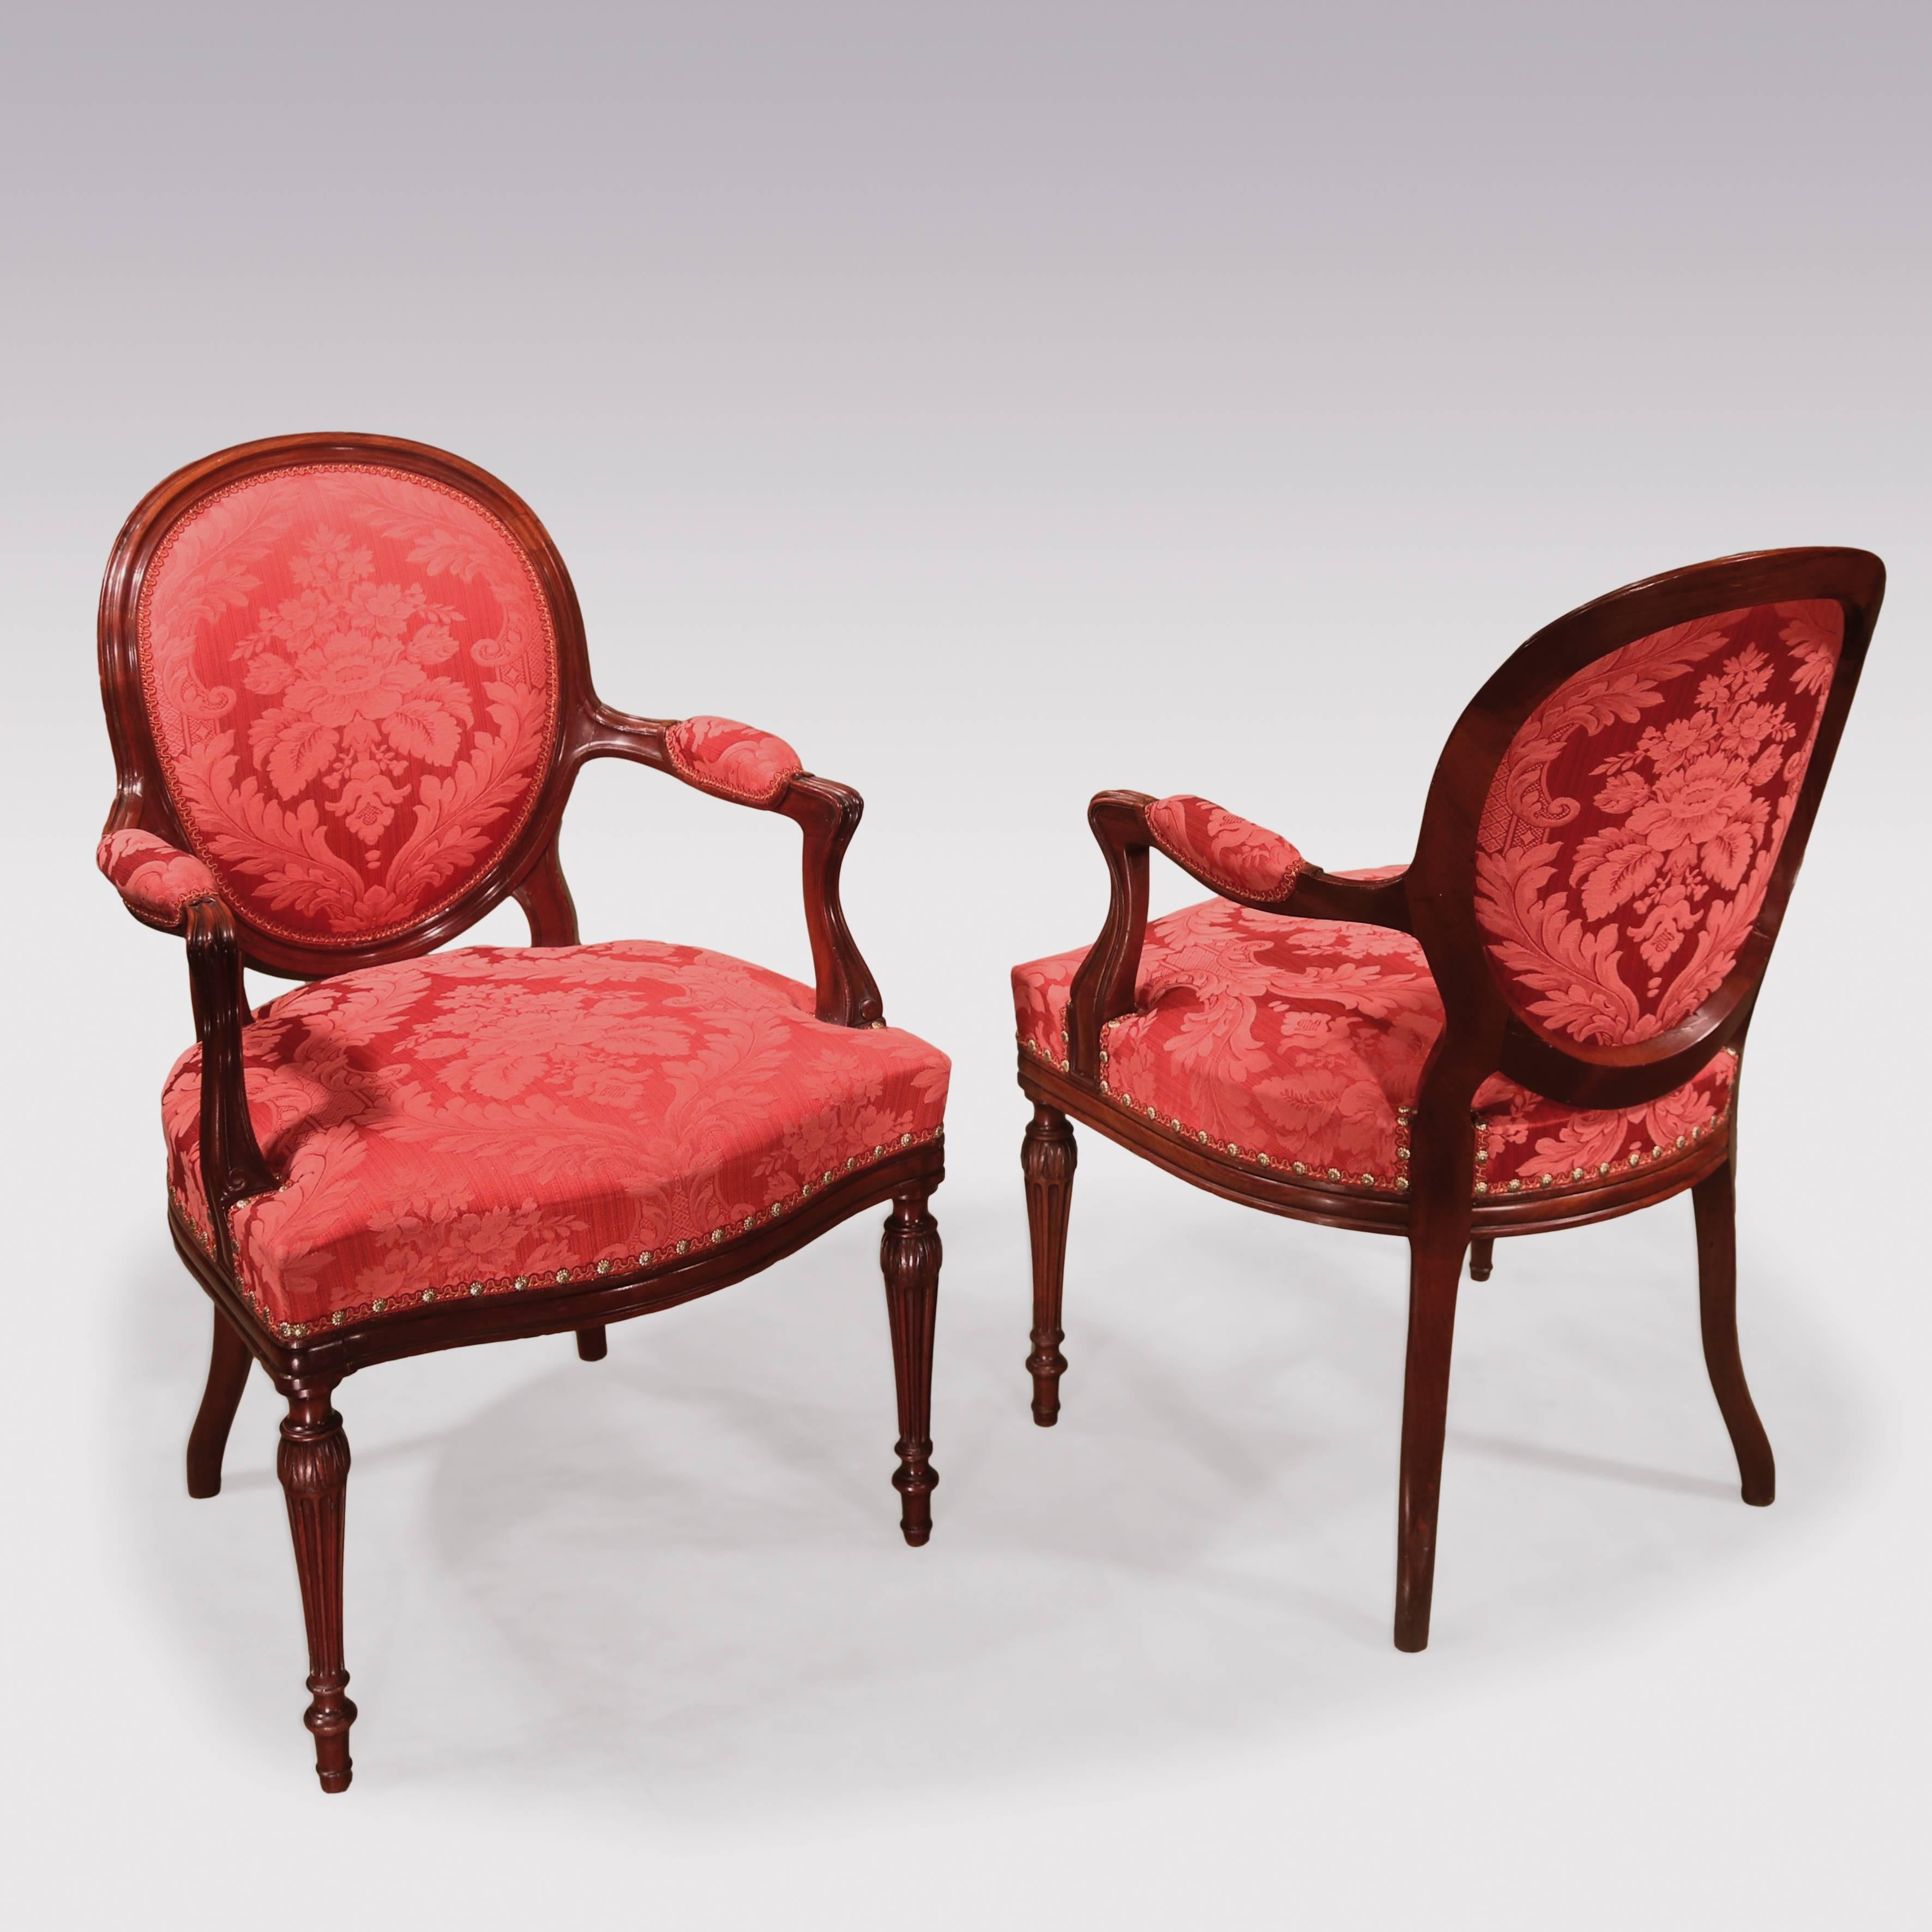 A pair of late 18th century Hepplewhite period mahogany armchairs, having moulded show-wood oval backs with scrolled set-back arms, above stuff over seats with moulded border, supported on acanthus carved turned, fluted tapering legs.